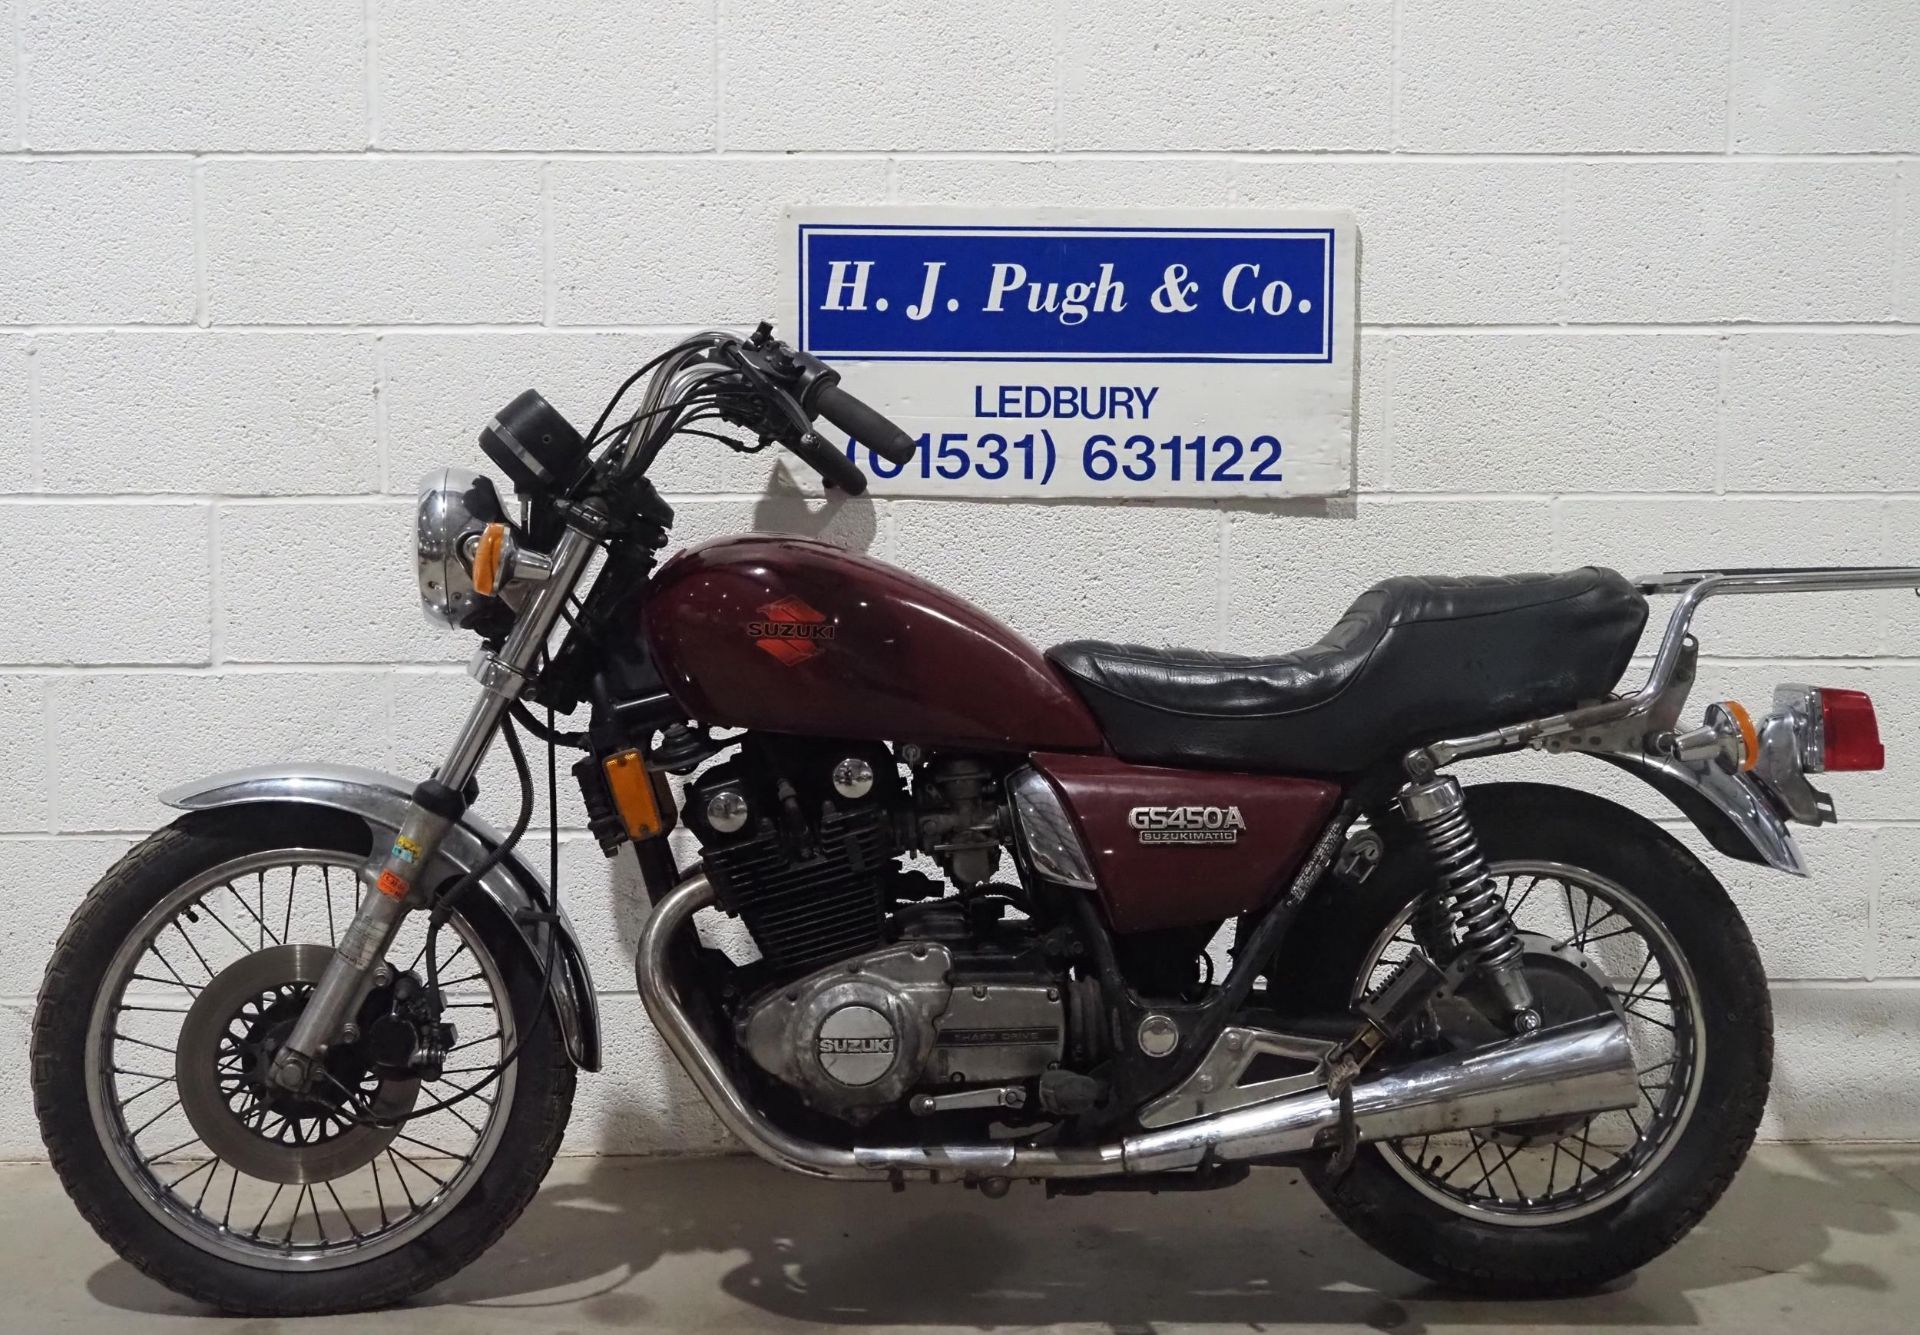 Suzuki GS450 motorcycle. Runs but will require recommissioning. Import. Come with Nova document. - Image 6 of 6